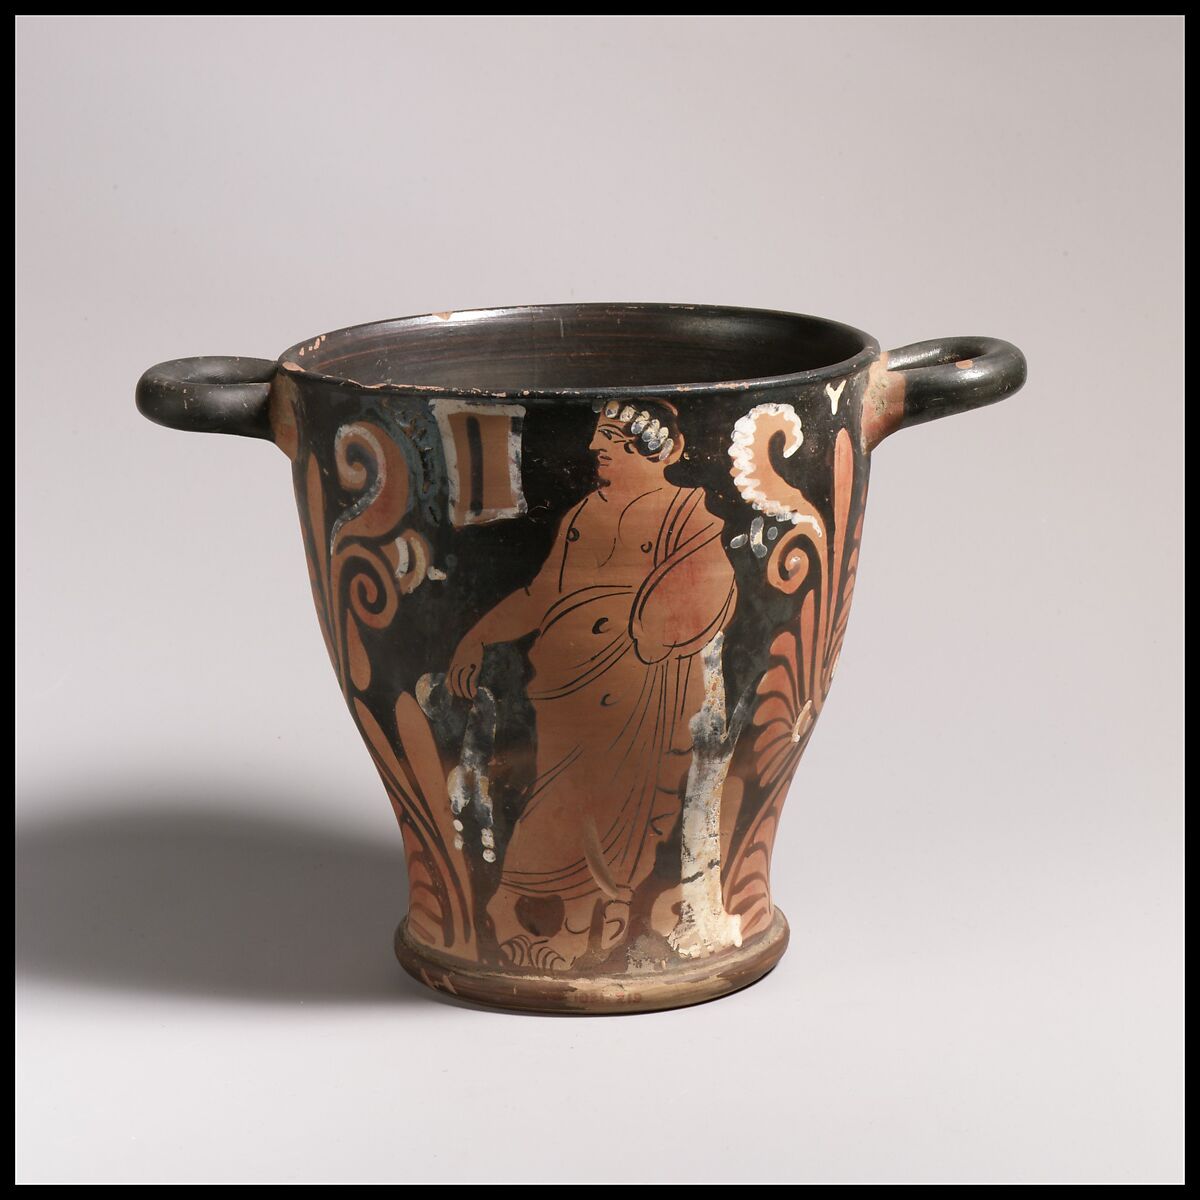 Skyphos, Related to the Manchester Painter, Terracotta, Greek, South Italian, Campanian 